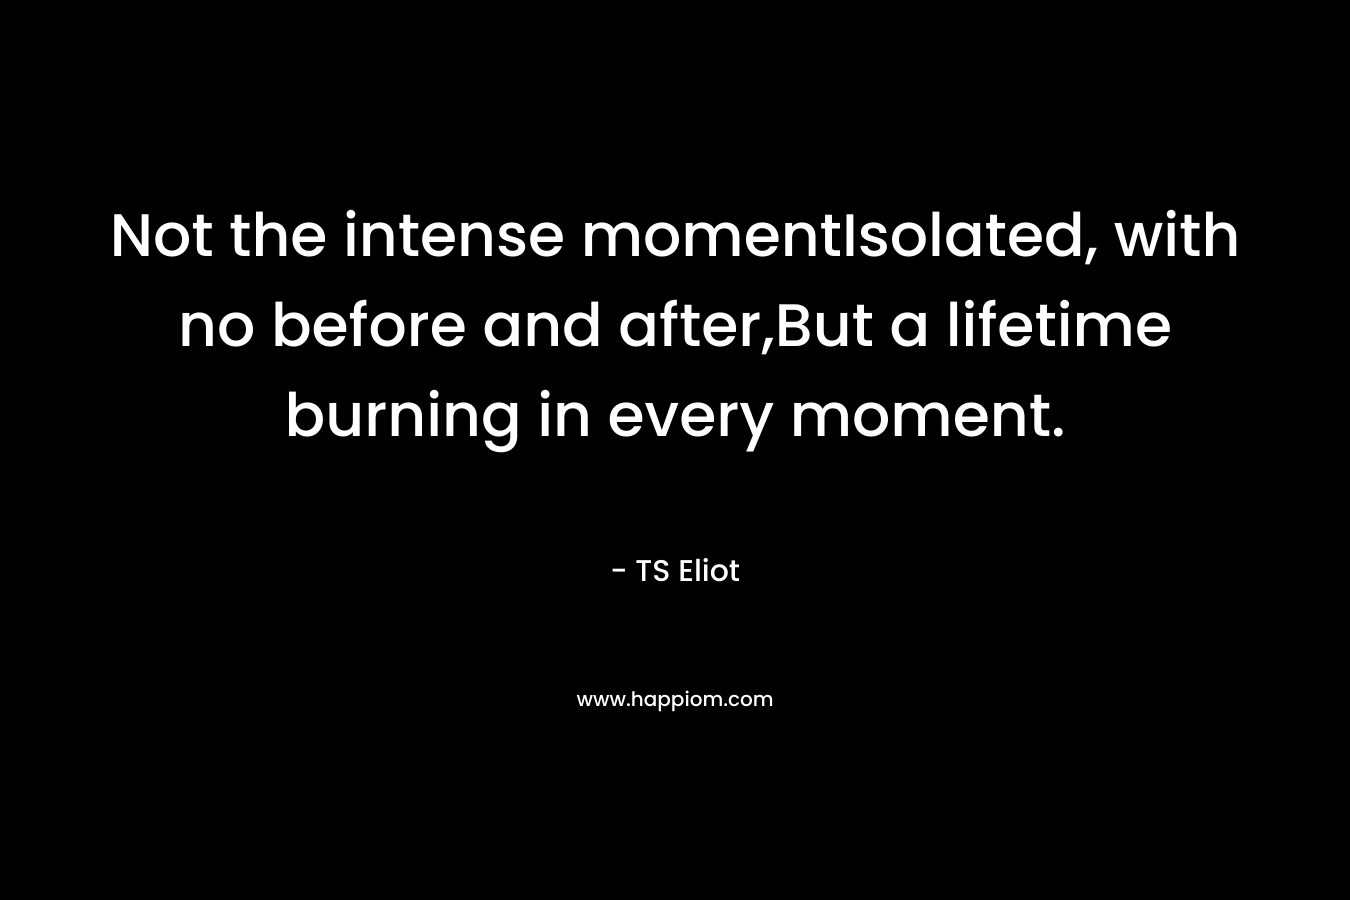 Not the intense momentIsolated, with no before and after,But a lifetime burning in every moment.